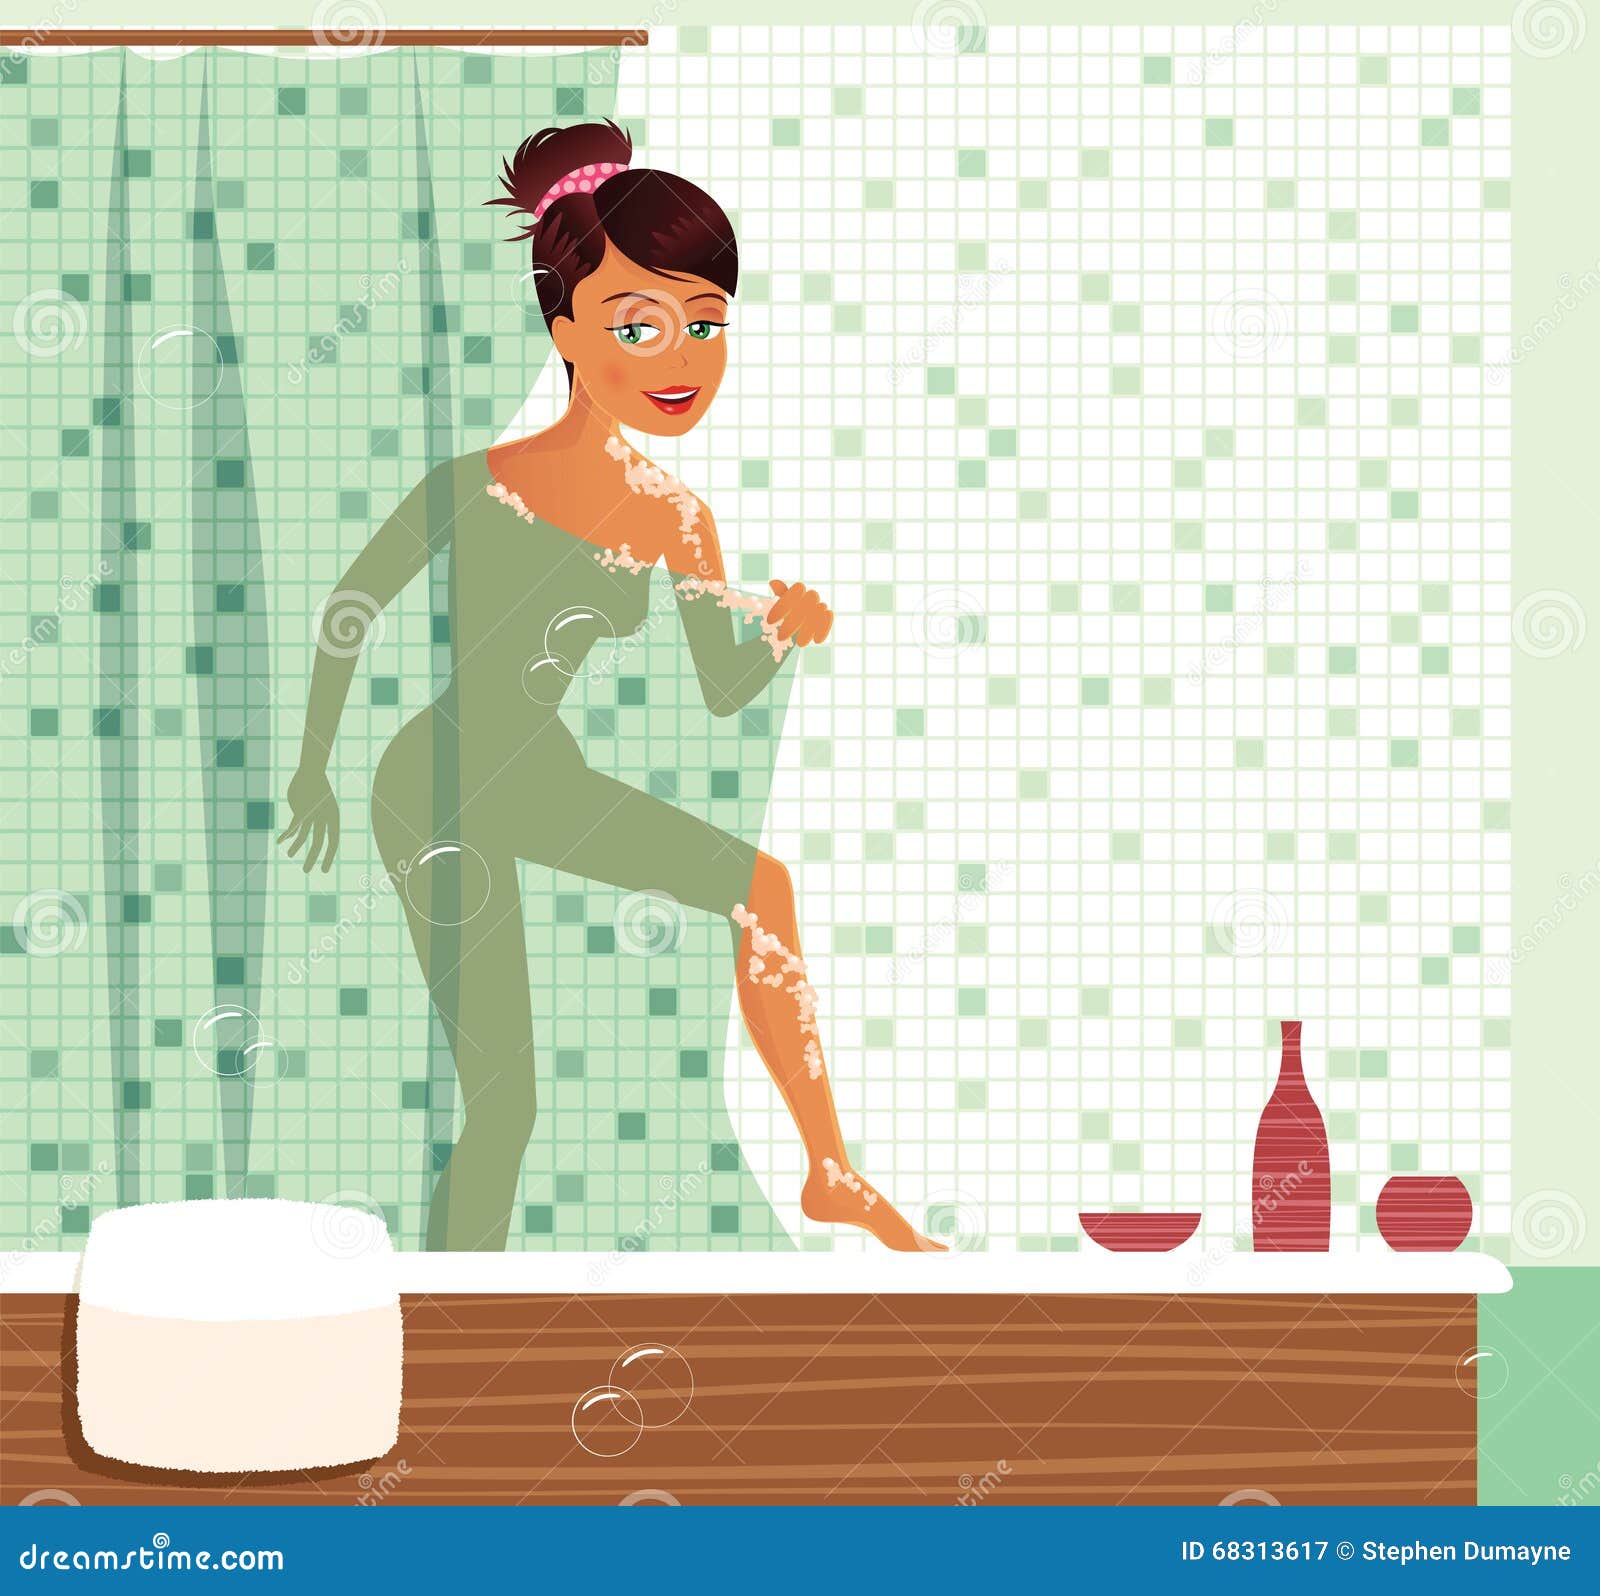 She a shower now. Have a Shower. Девушка в душе иллюстрация. Illustration of taking a Shower.